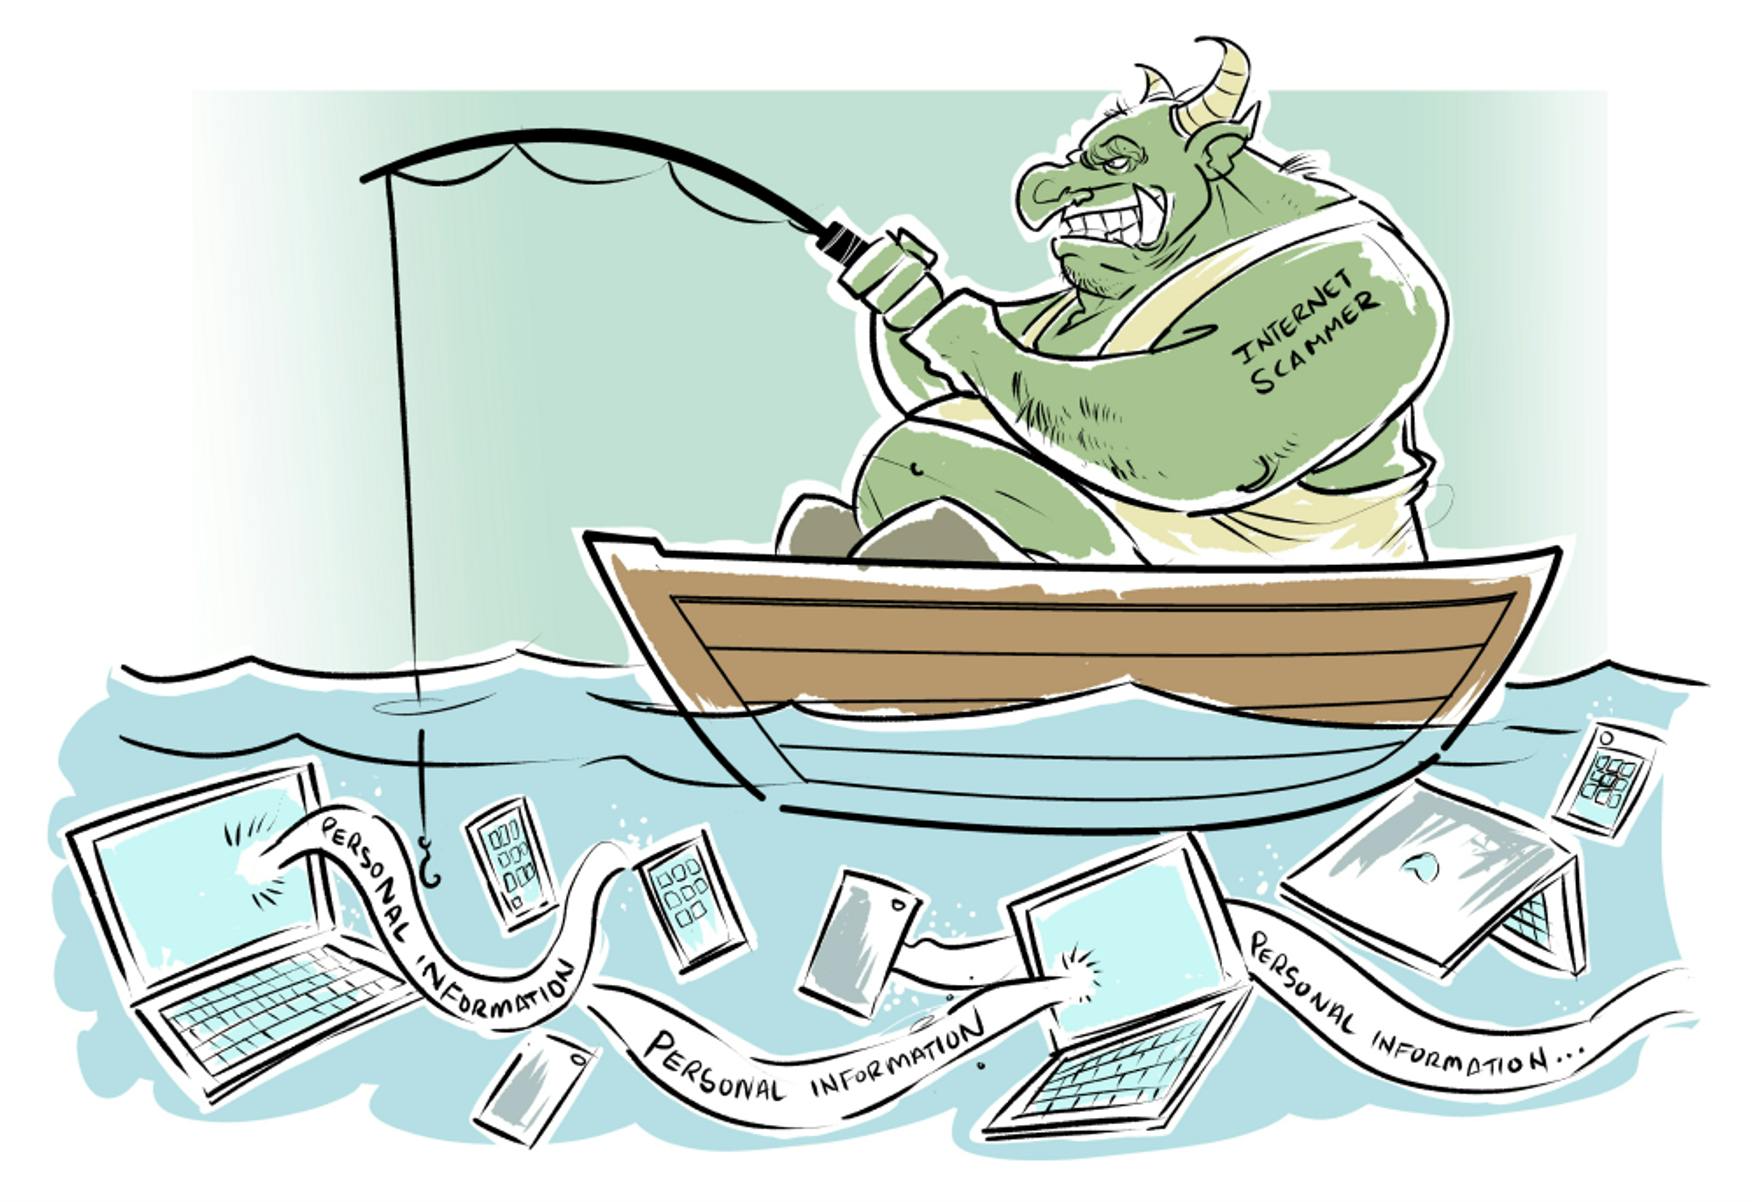 A troll phishing from a boat